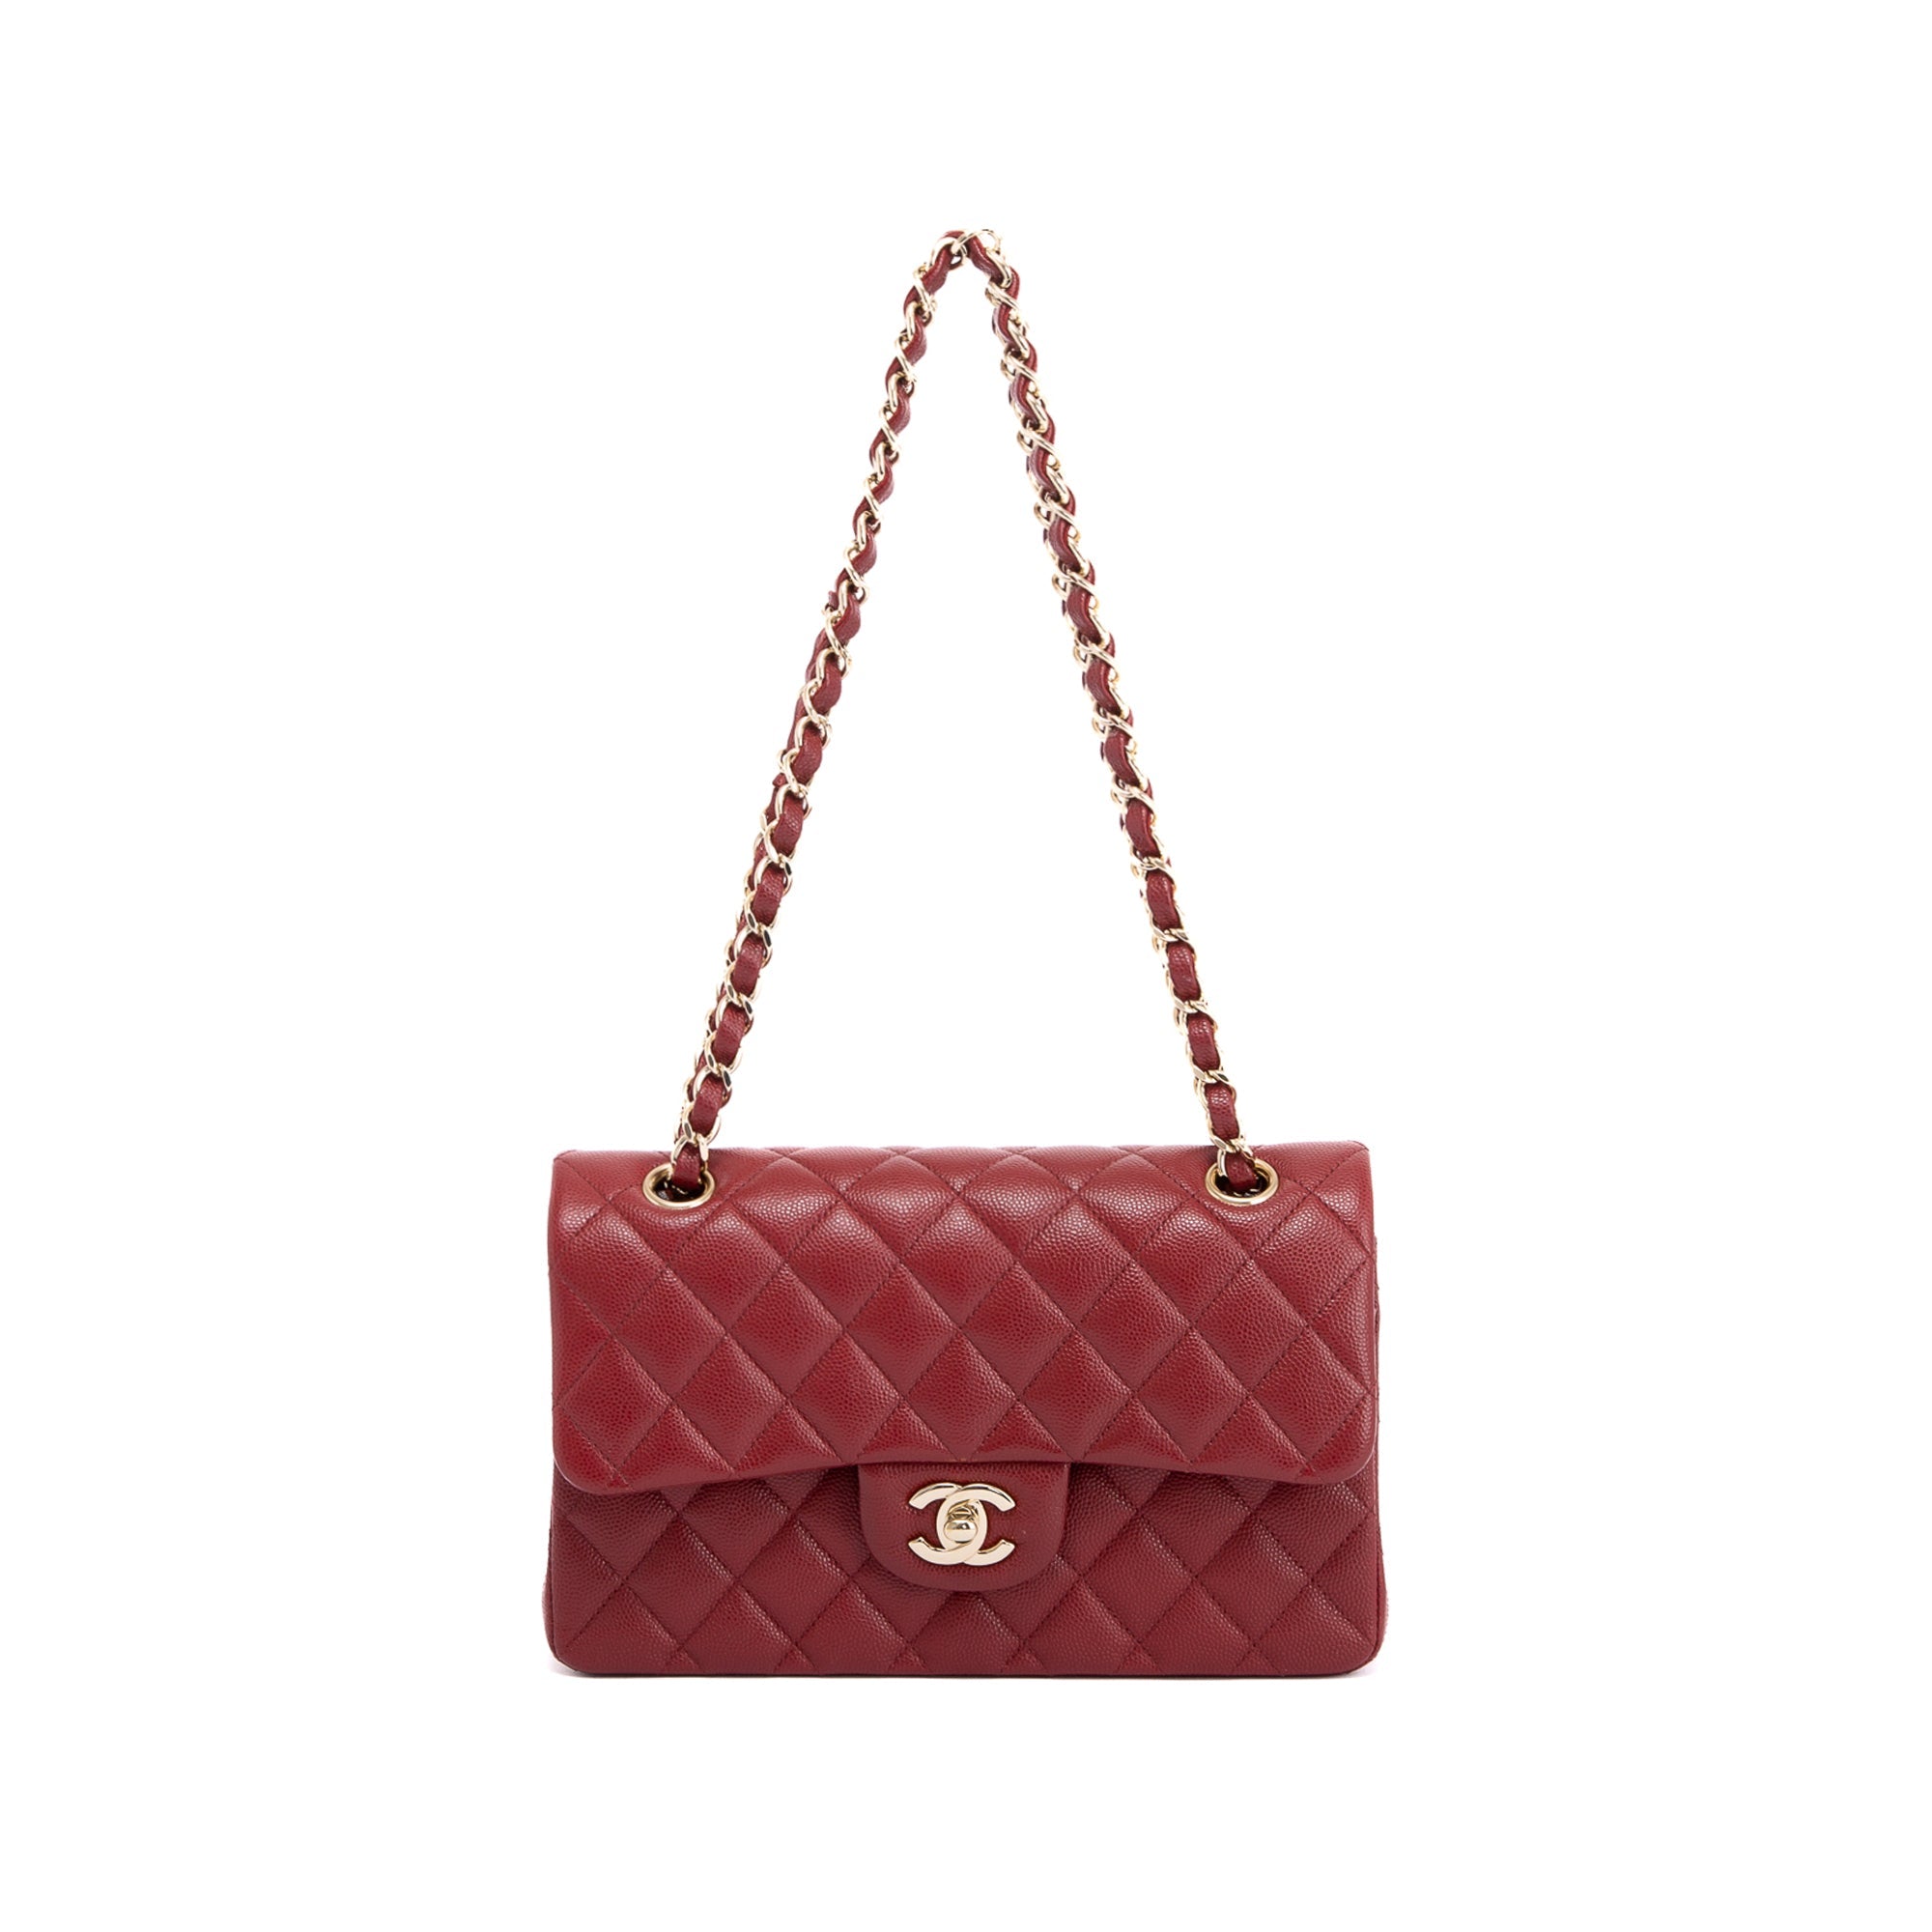 Chanel Burgundy Caviar Small Classic Double Flap Bag w/ Box & Authenticity  Card